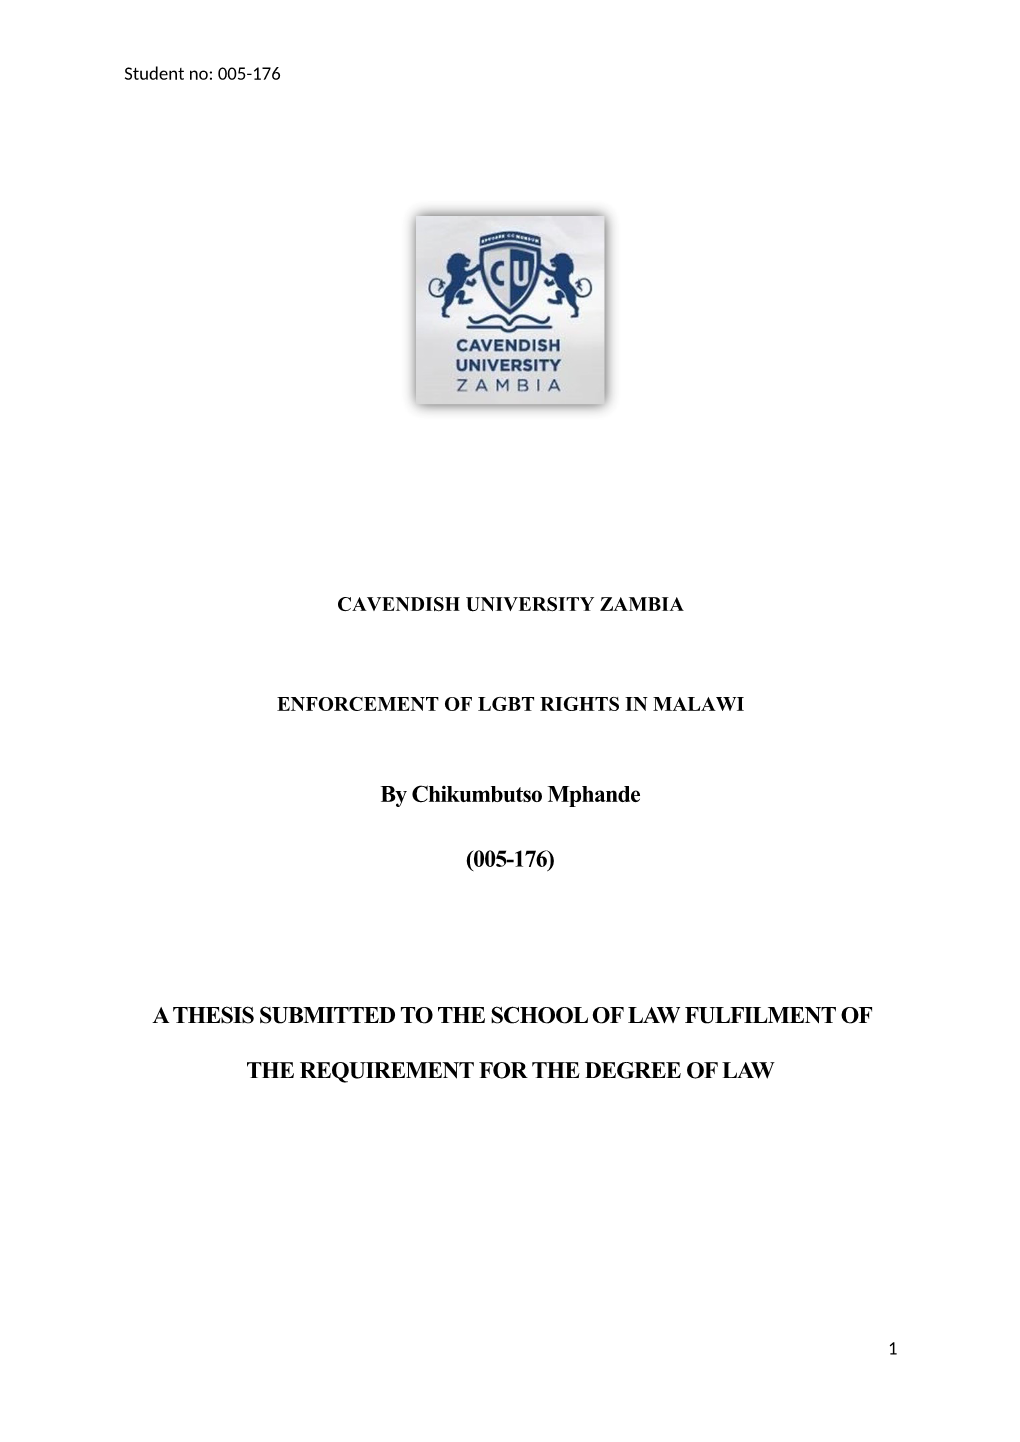 By Chikumbutso Mphande (005-176) a THESIS SUBMITTED to the SCHOOL of LAW FULFILMENT of the REQUIREMENT for the DEGREE OF